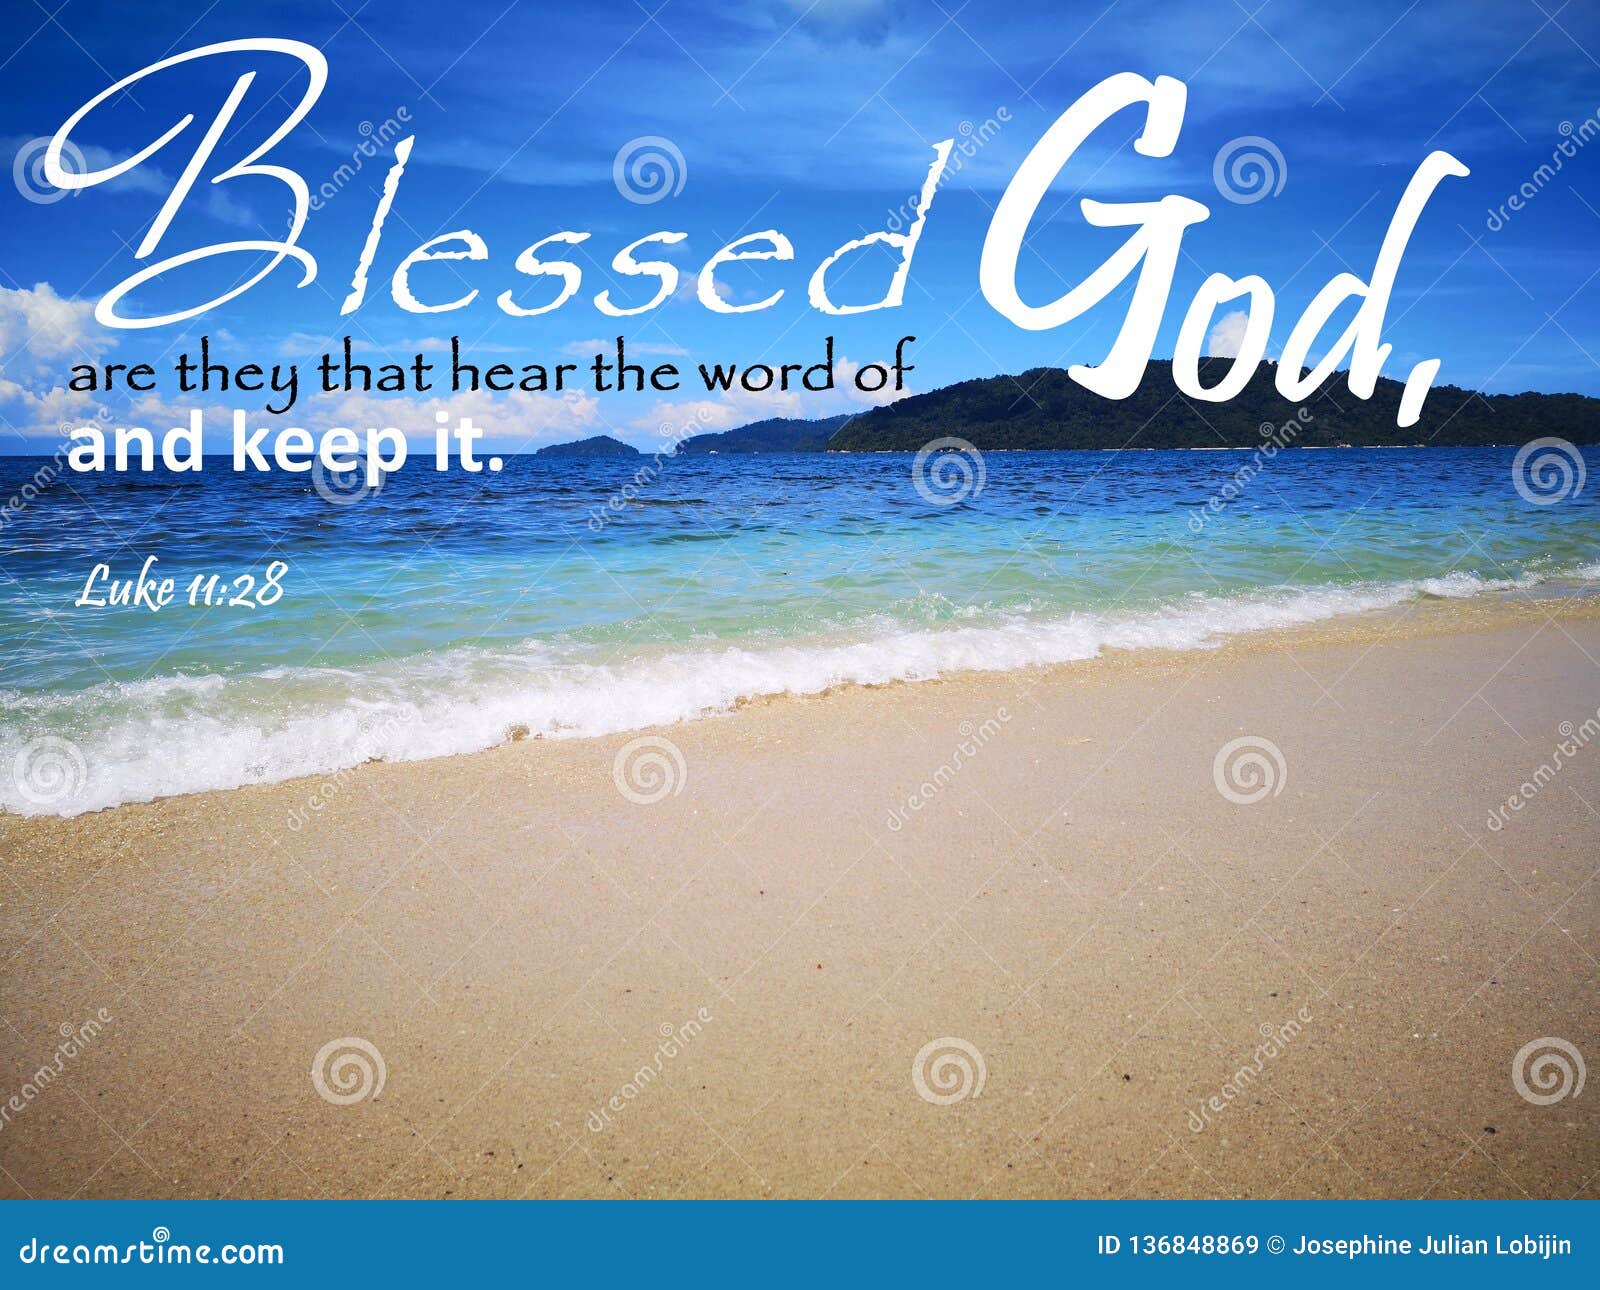 Blessed Are They That Hear The Word Of God With Background Ocean View And A Lady Look Up To The Sky Design For Christianity Stock Image Image Of Lady Label